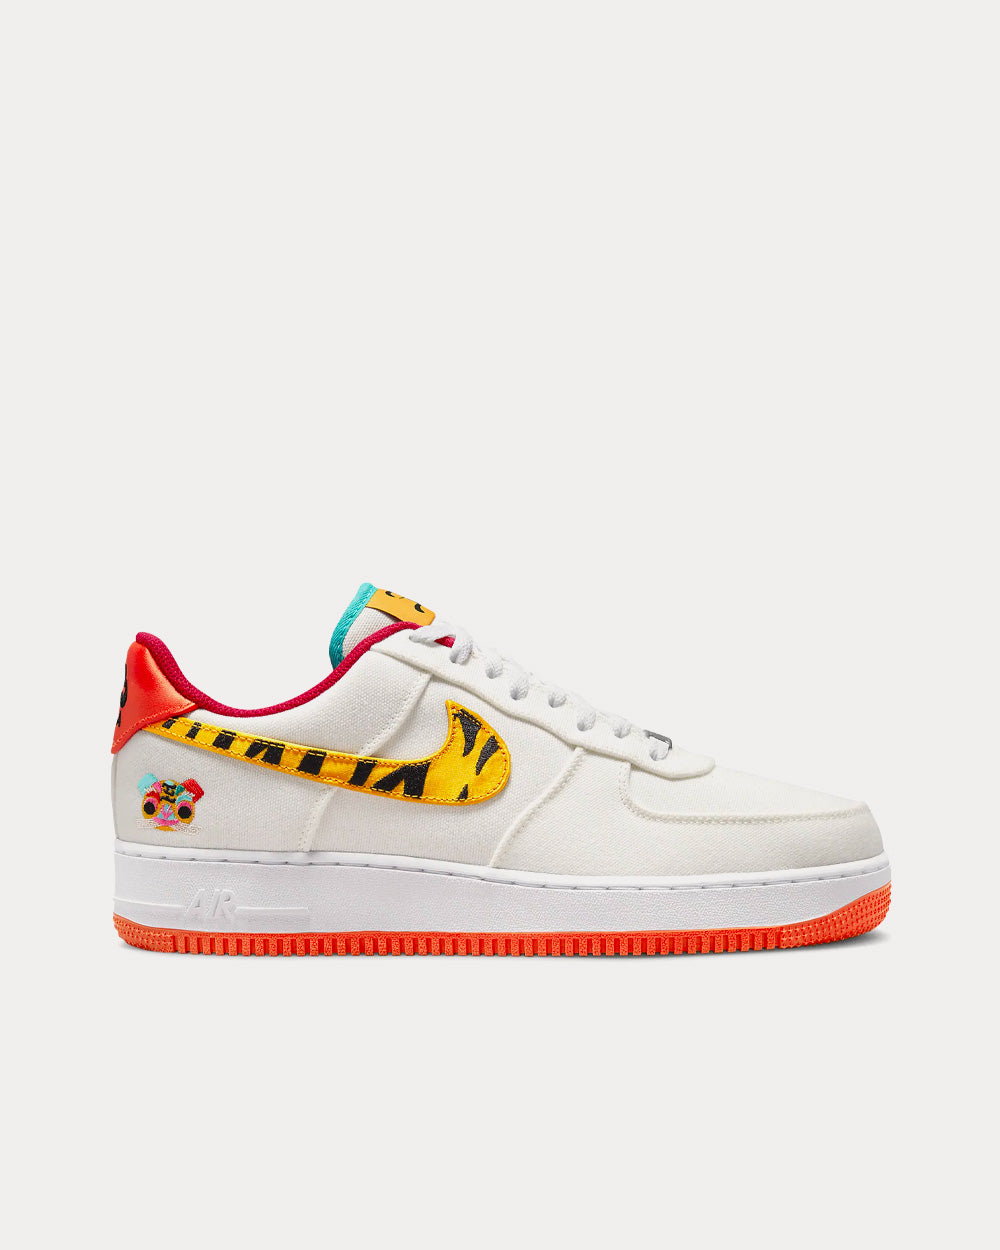 Ulykke Trænge ind Dyrke motion Nike Air Force 1 '07 LV8 Sail / White / University Gold / University Gold  Low Top Sneakers - Sneak in Peace